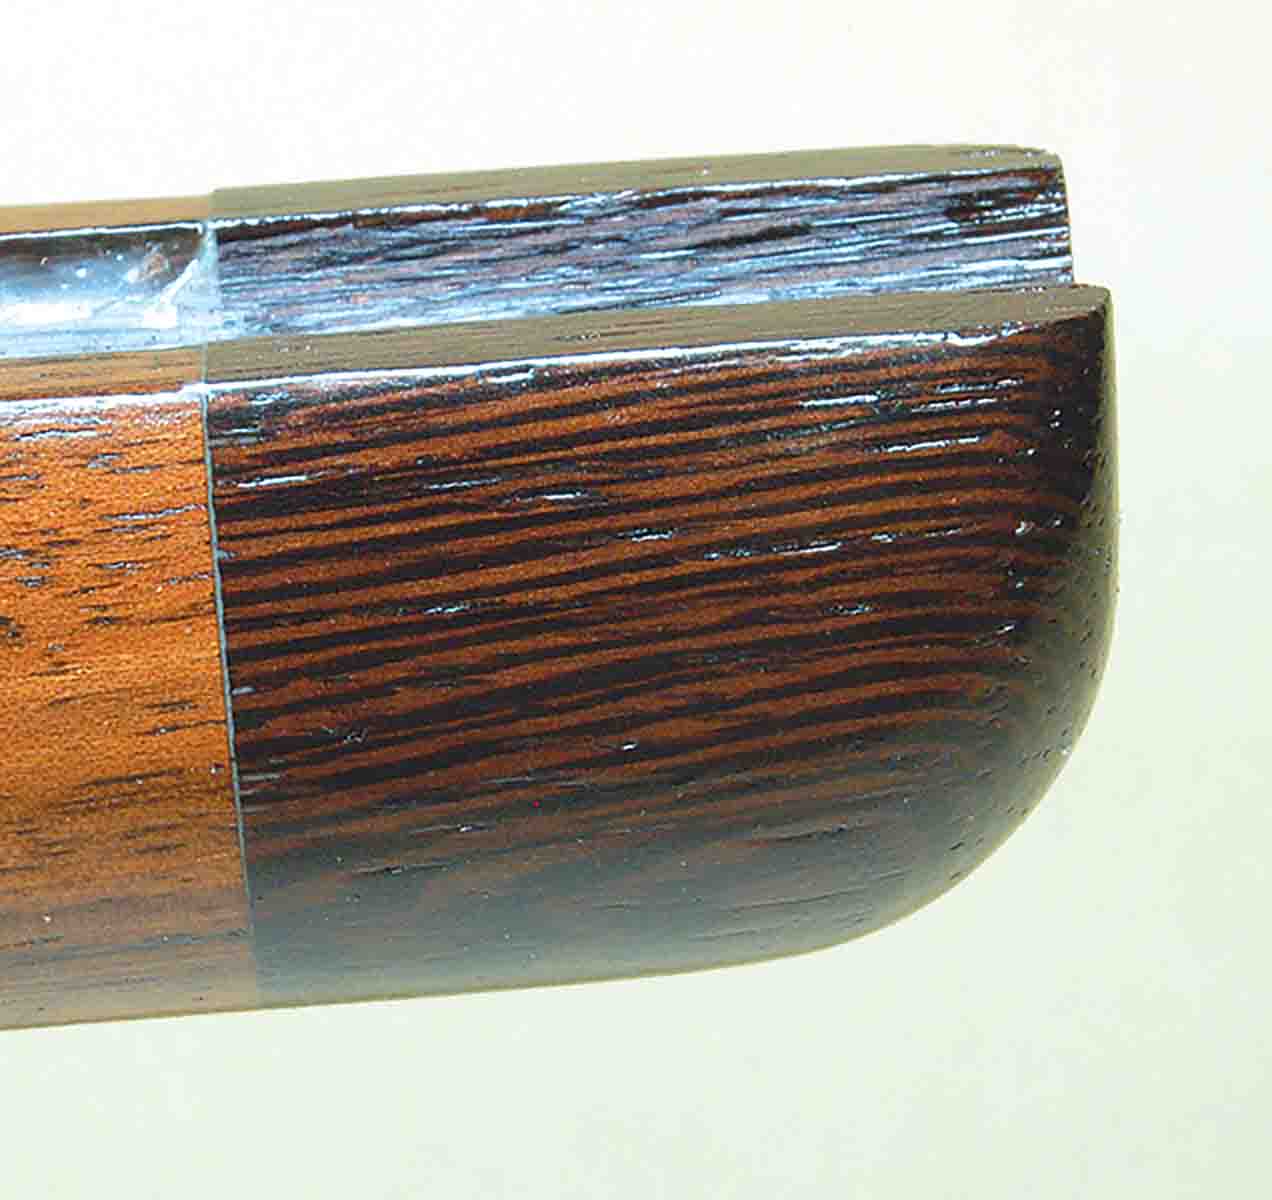 The Wenge forend tip is quite dark and a good substitute for ebony.